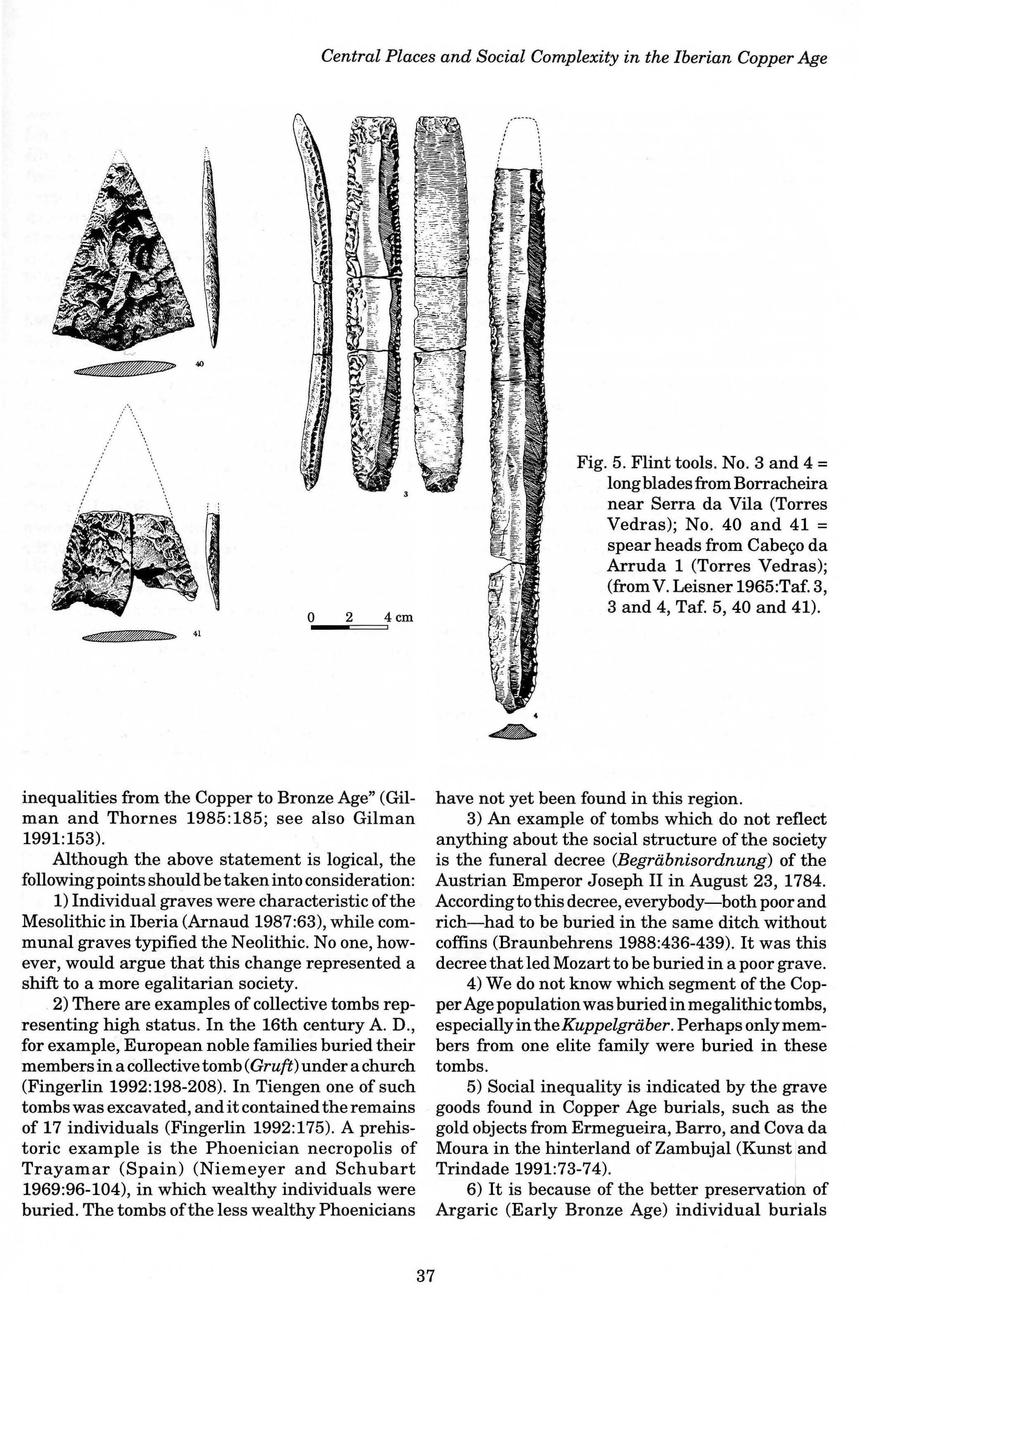 Central Places and Social Complexity in the Iberian Copper Age Fig. 5. Flint tools. No. 3 and 4 = long blades from Borracheira near Serra da Vila (Torres Vedras); No.